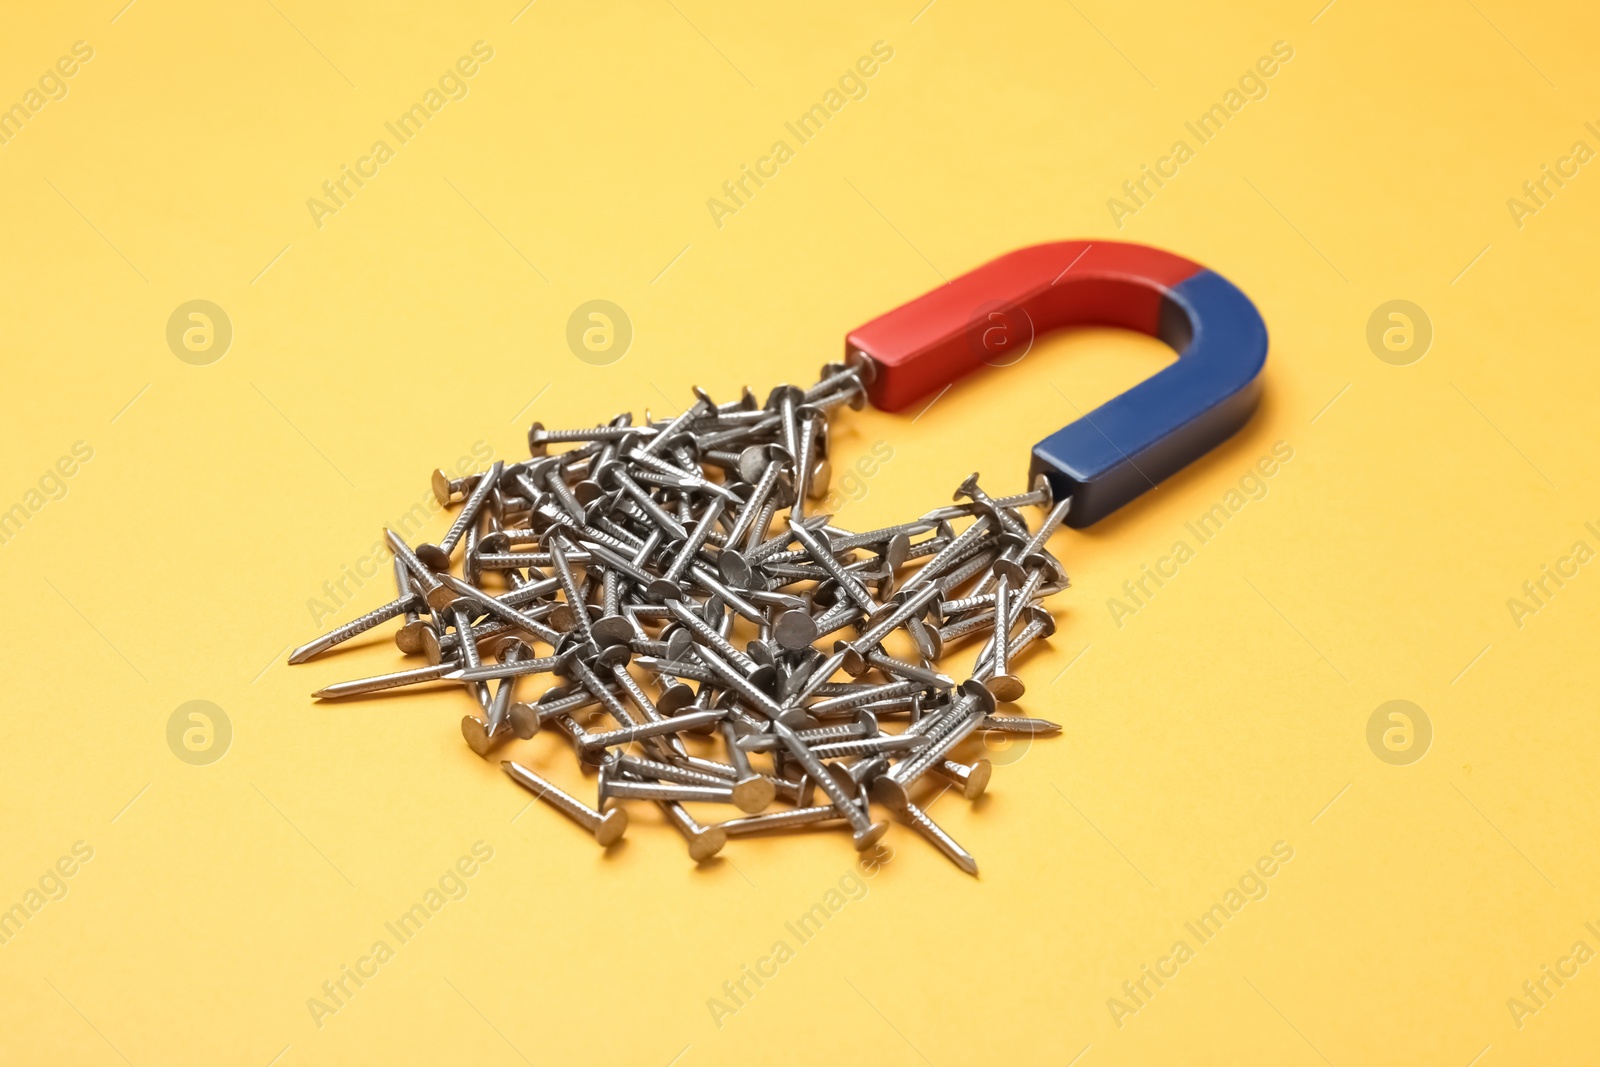 Photo of Horseshoe magnet attracting nails on color background